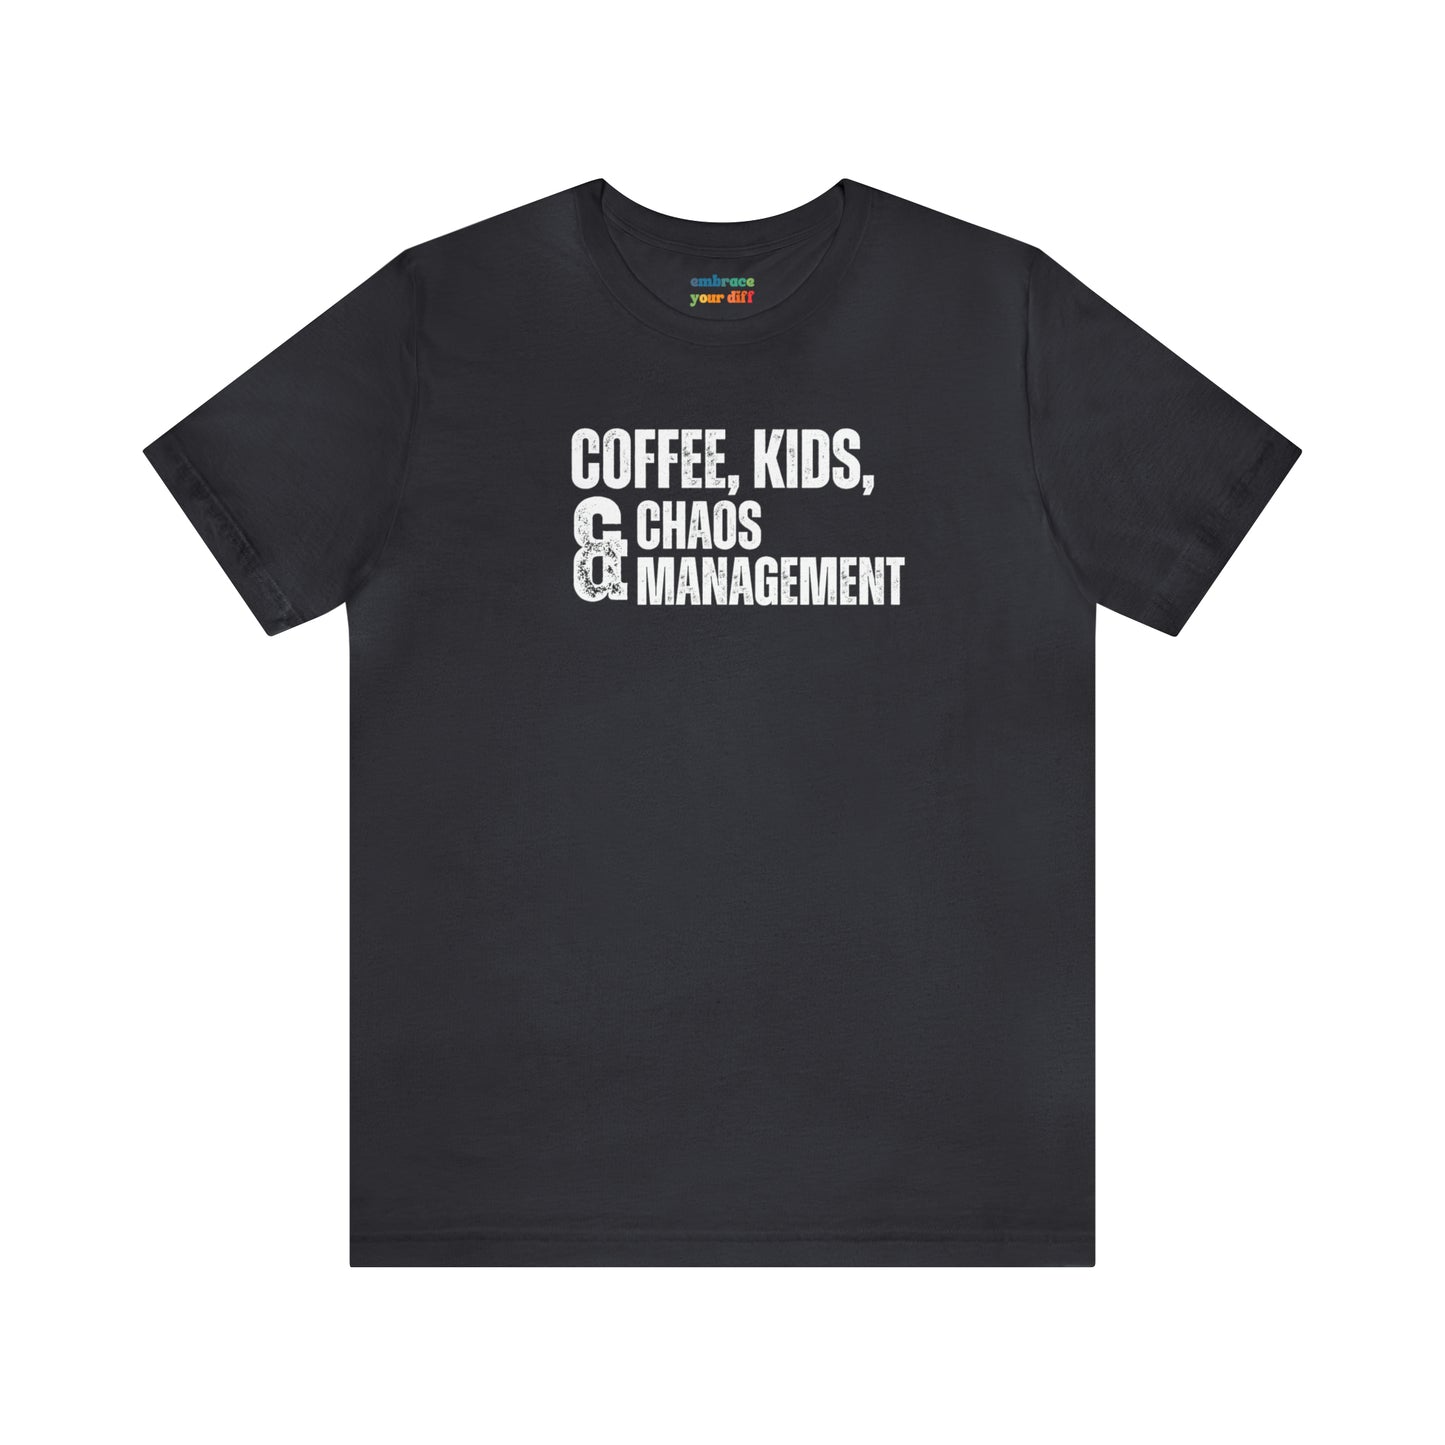 Parent Humor Unisex Shirt - Coffee Loving Parents Gift Idea - Funny Parenting Tshirt for Moms and Dads - Embrace Your Diff